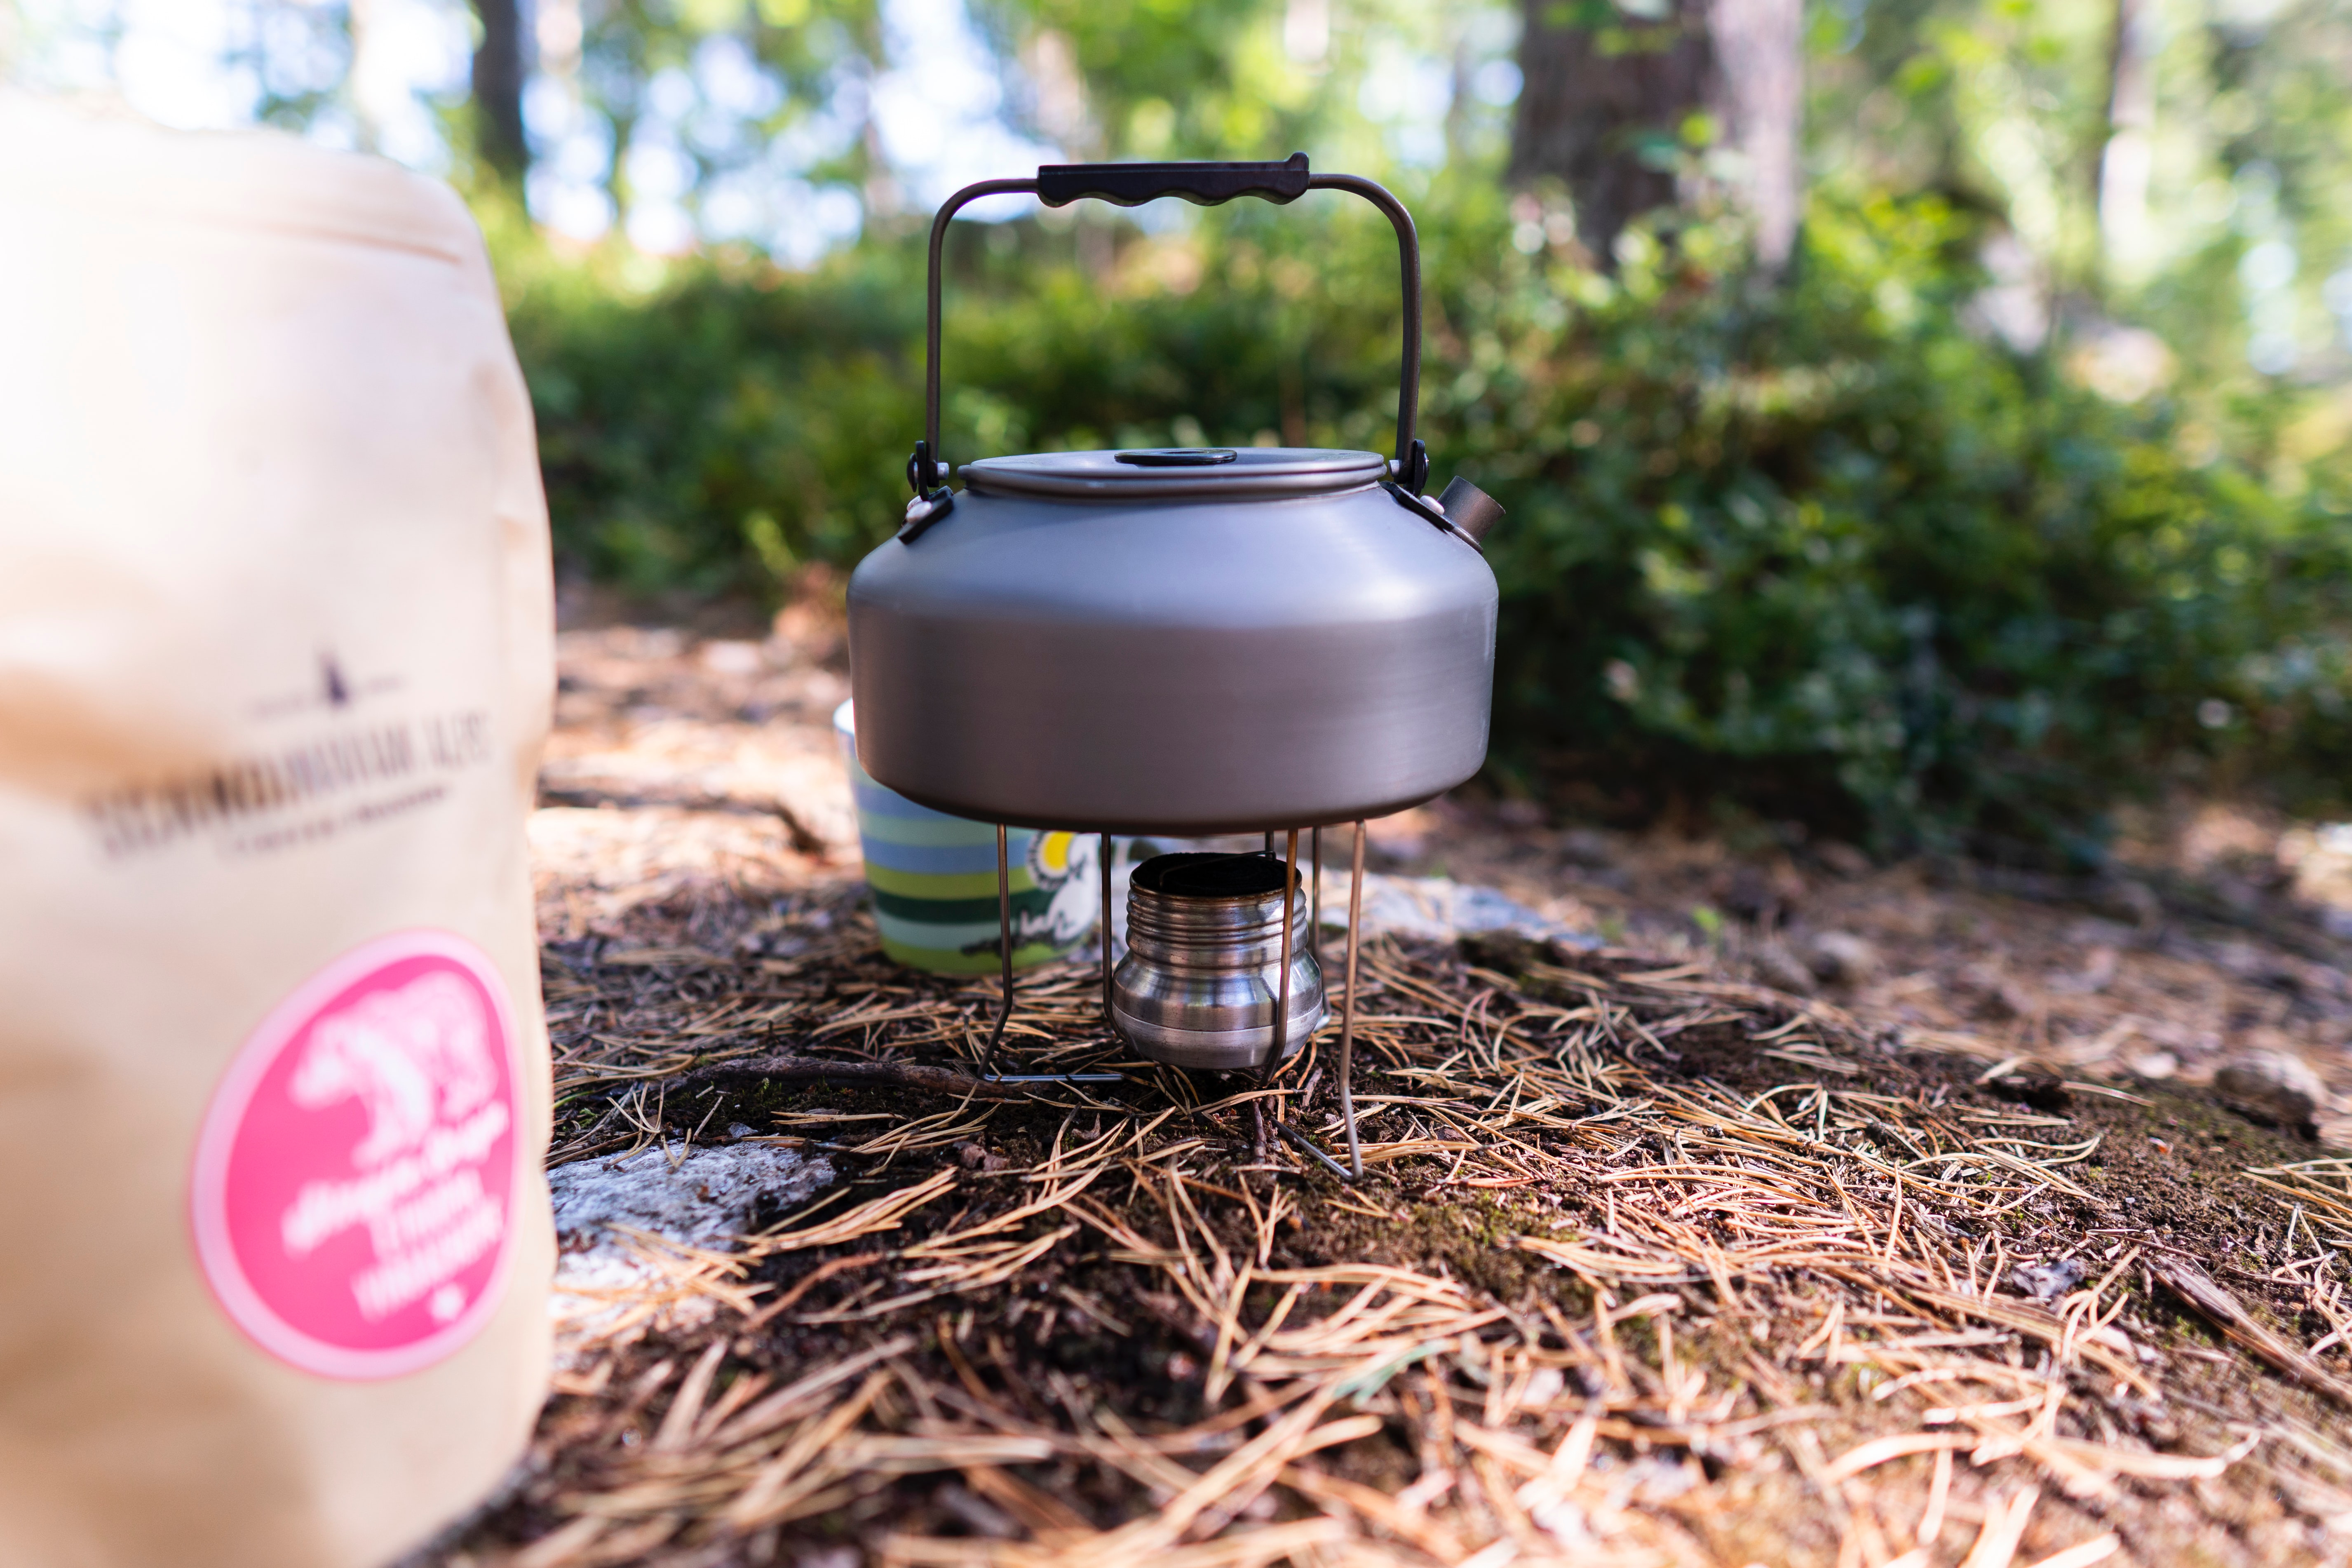 10 Best Camping Kettles: Top Picks, Reviews & Buying Advice 2022